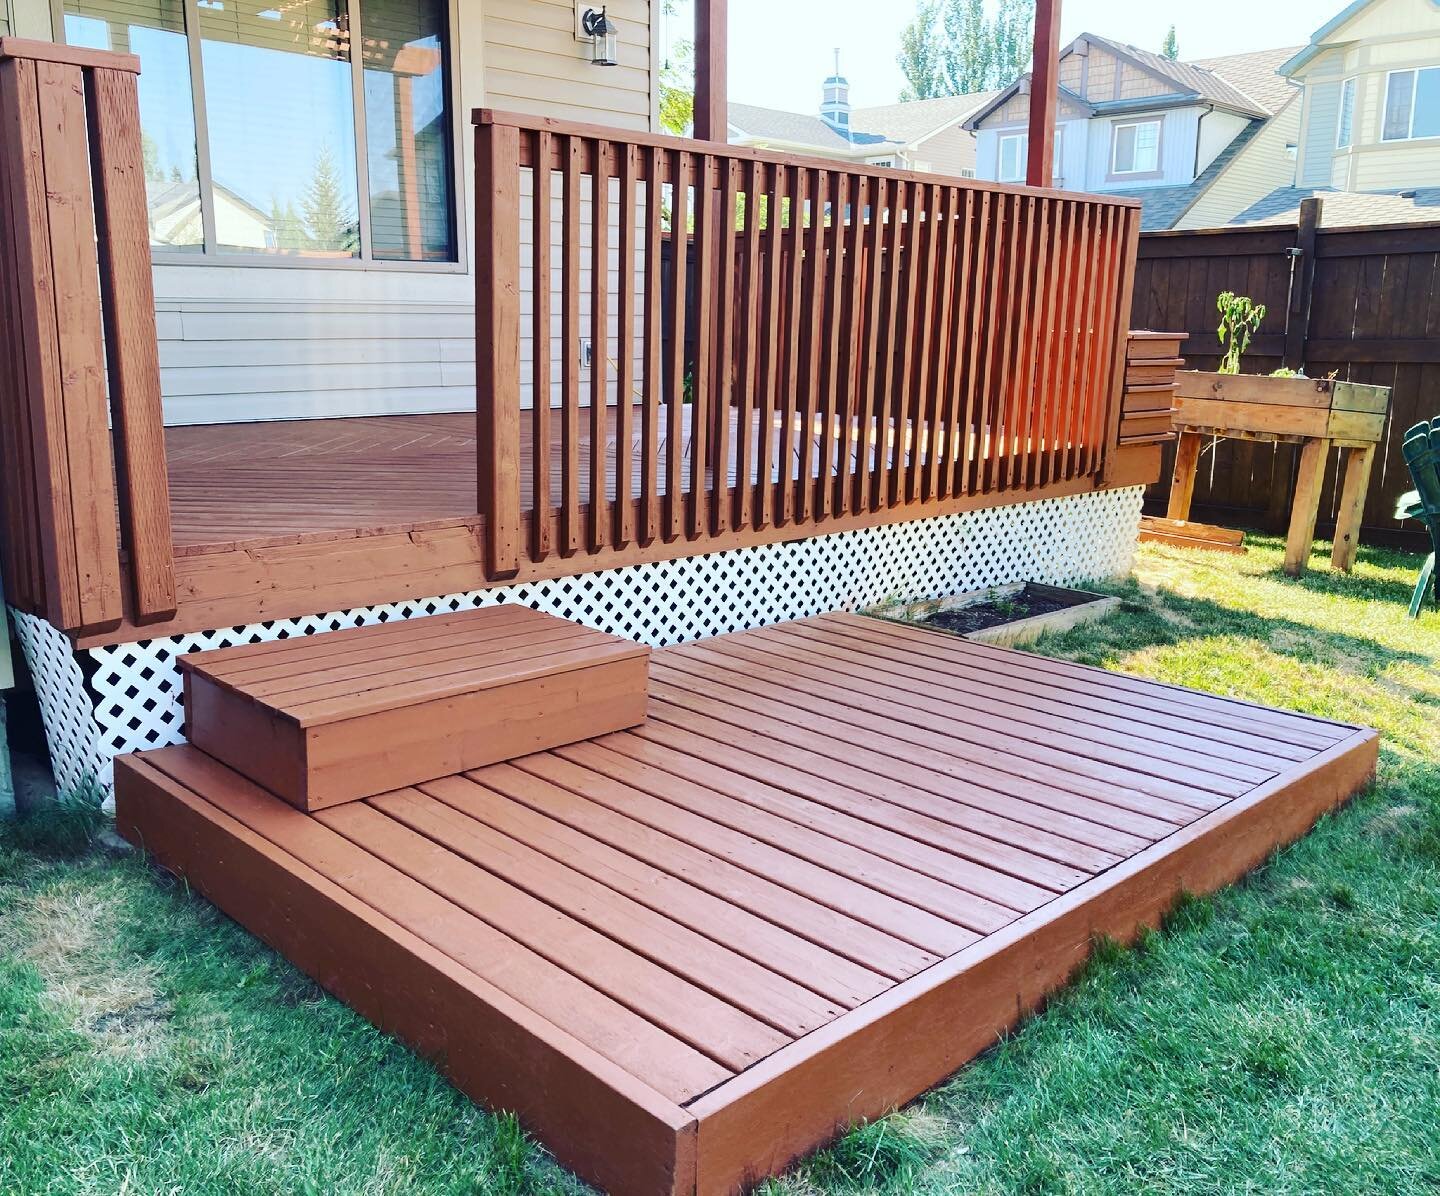 Transformation Tuesday! 

Here&rsquo;s a lovely little deck and not so little) and not so little fence restoration in #auburnbayyyc 

We&rsquo;ve thankfully caught up on projects we had to reschedule due to all the rain ☔️ Calgary had in June, but th